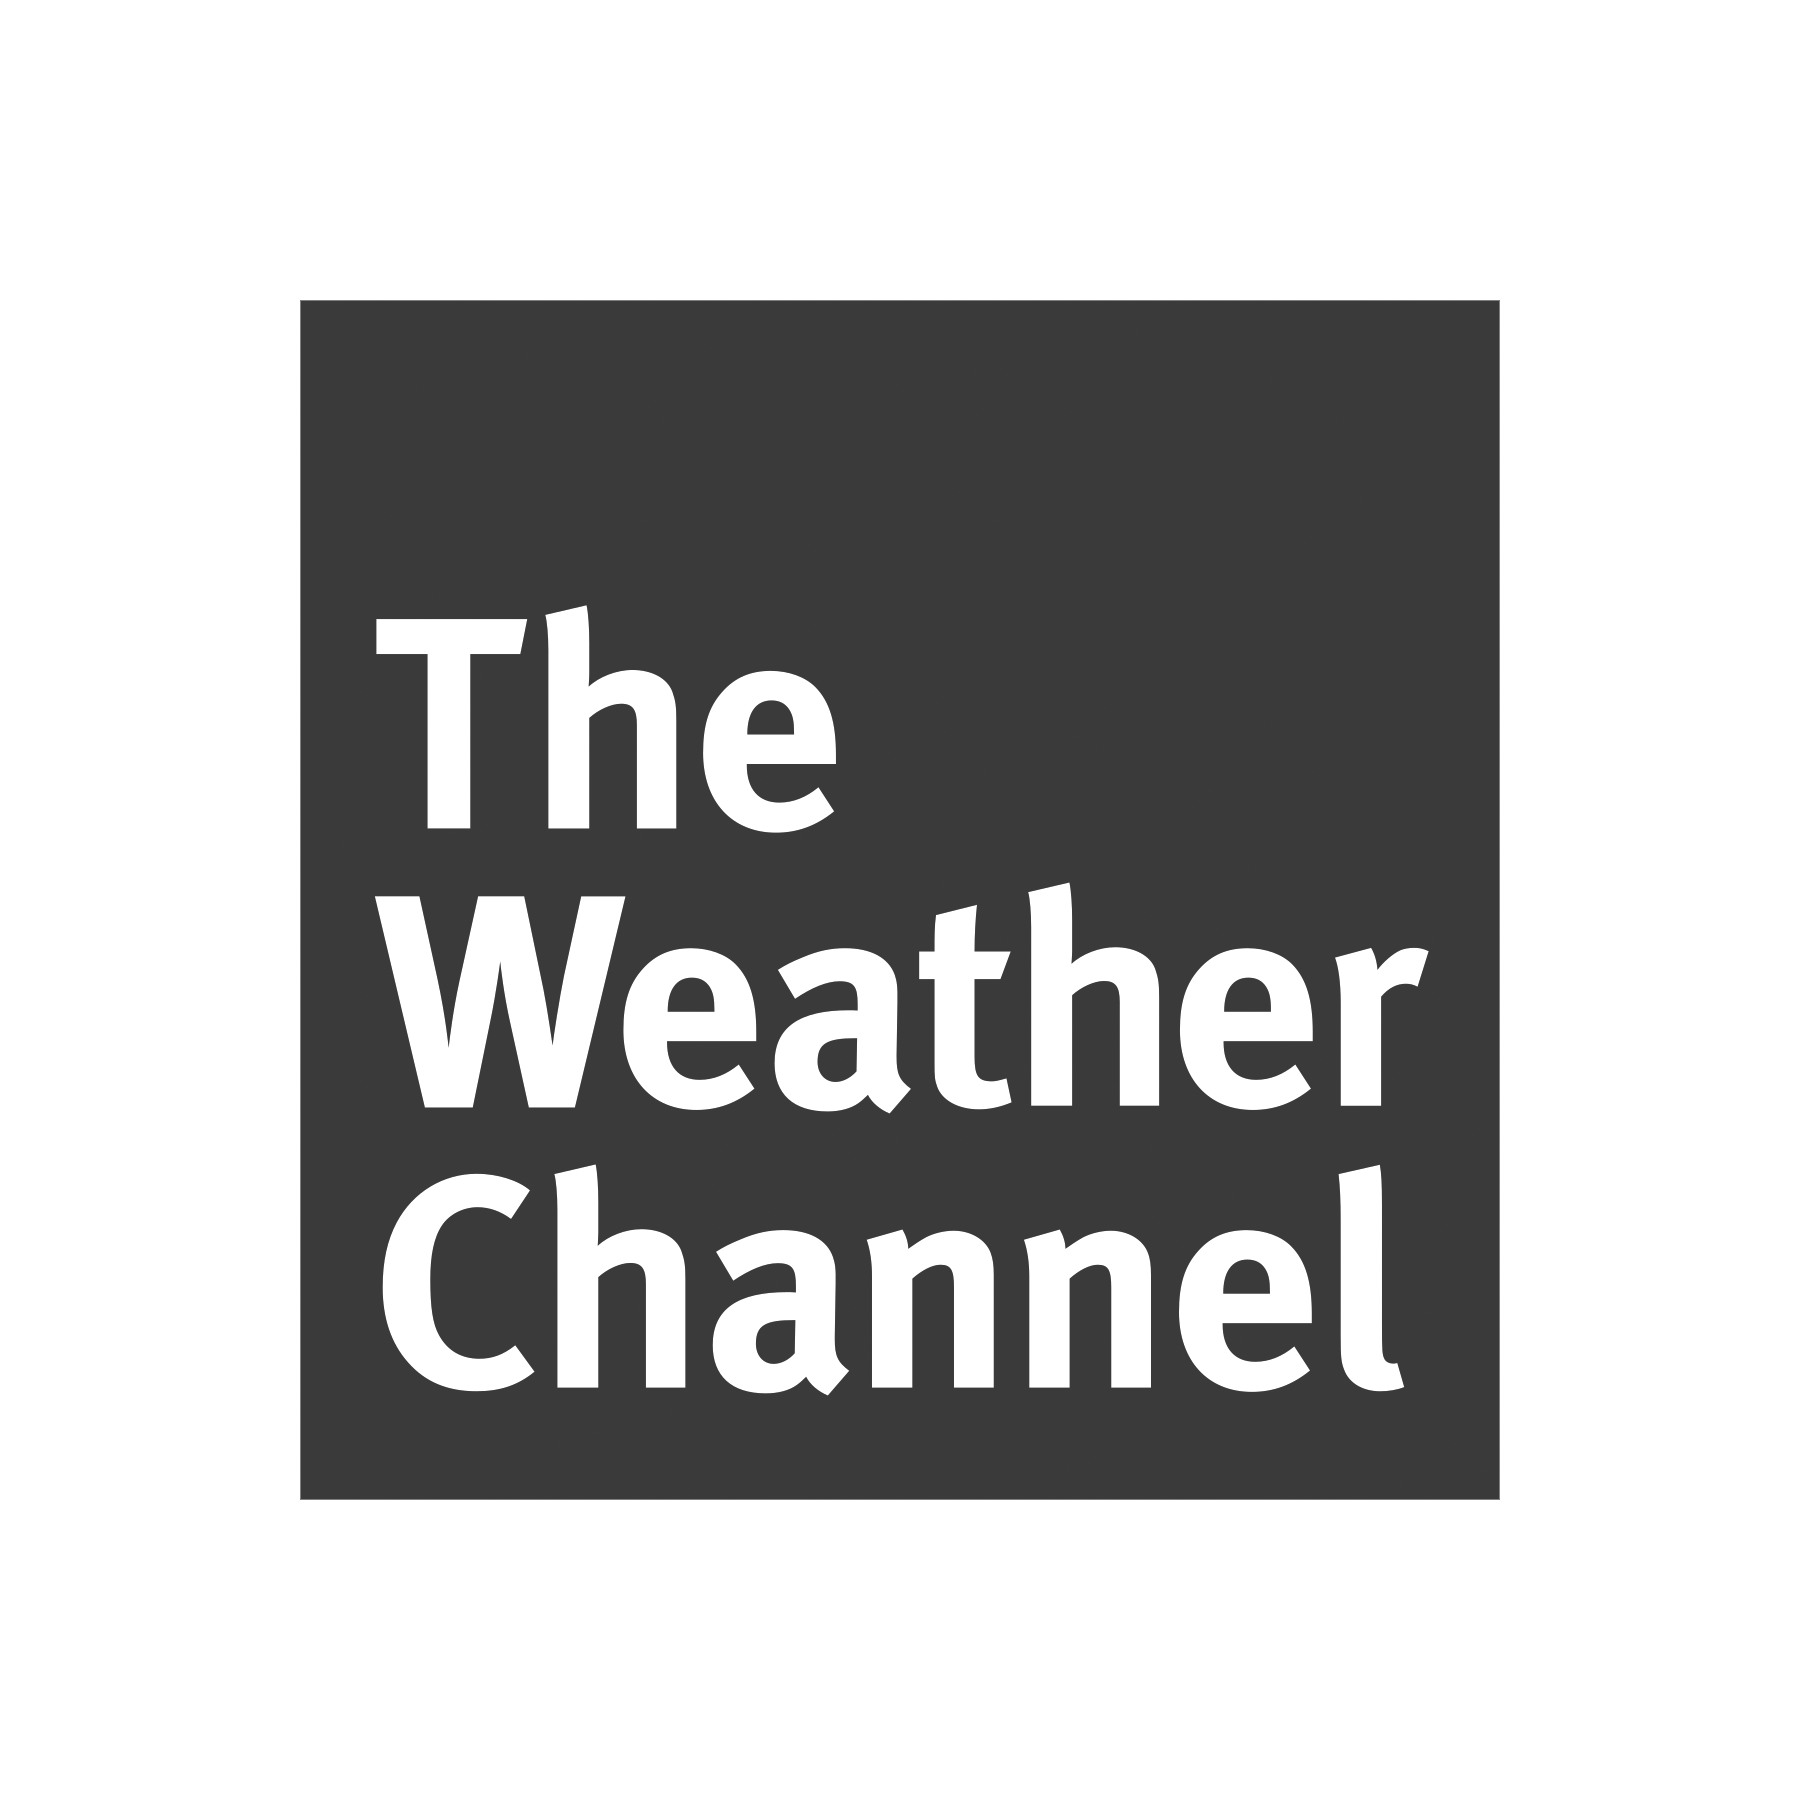 The_Weather_Channel_logo grey.png